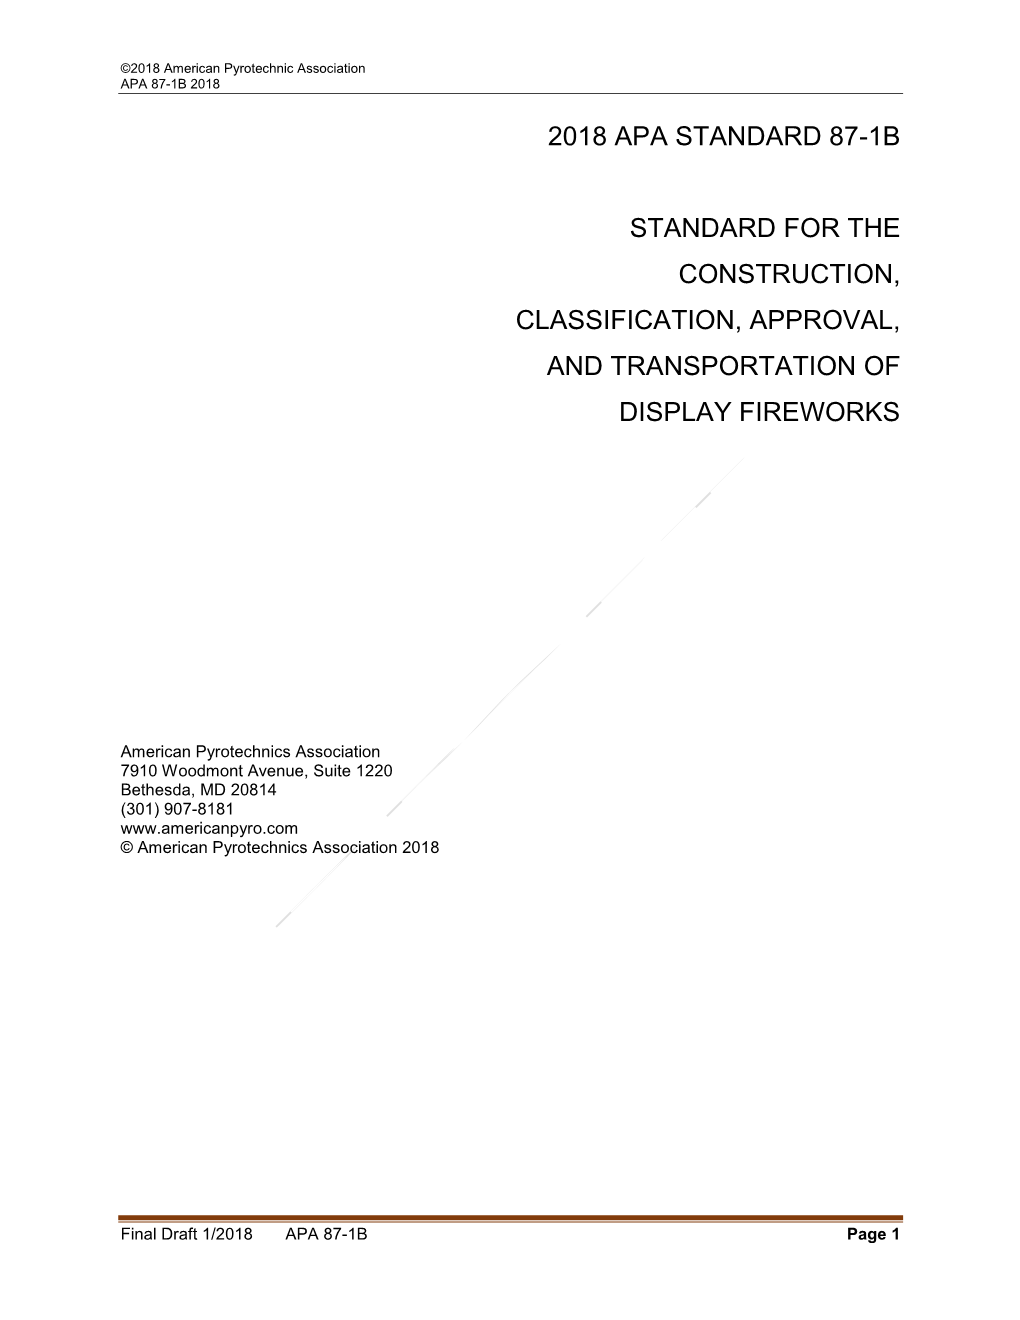 APA 87-1B Standard for the Construction, Classification